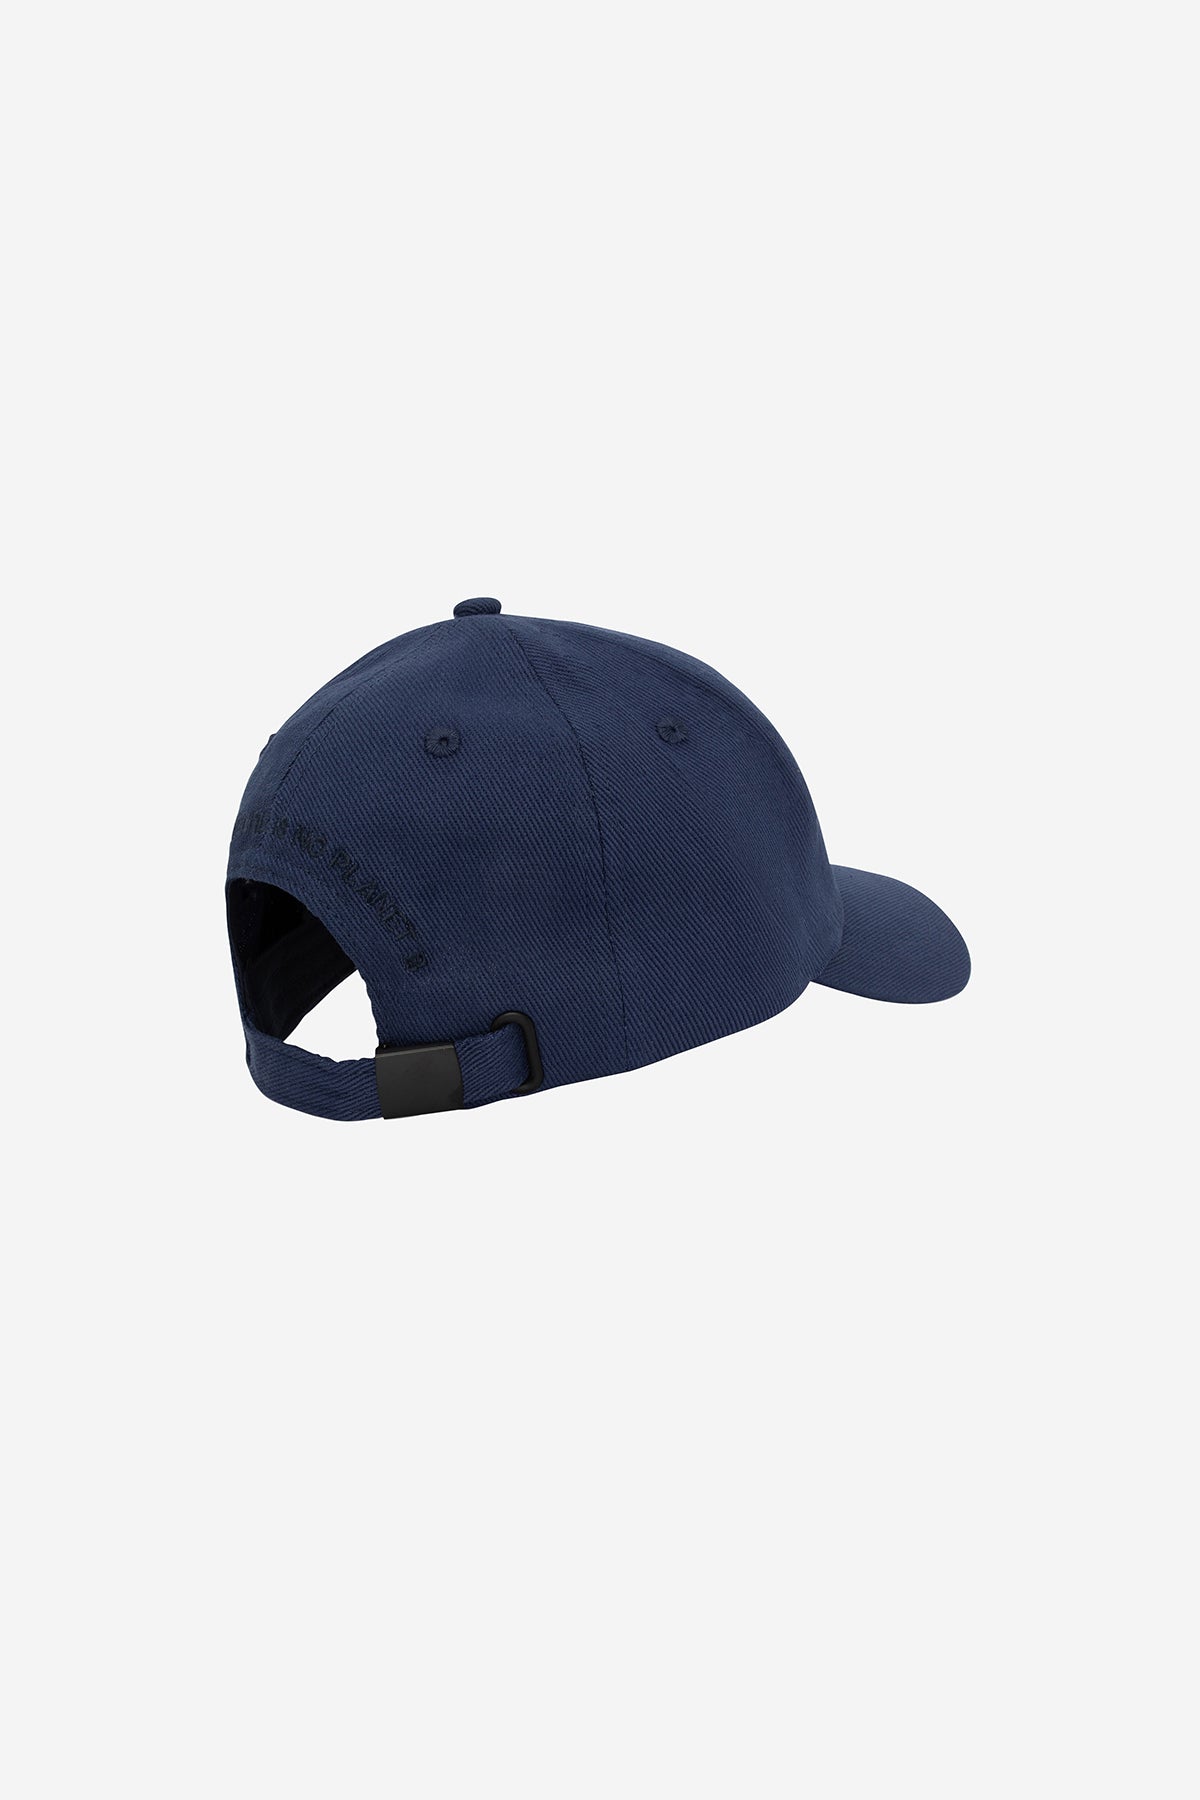 BLUE EMBROIDERED CAP 